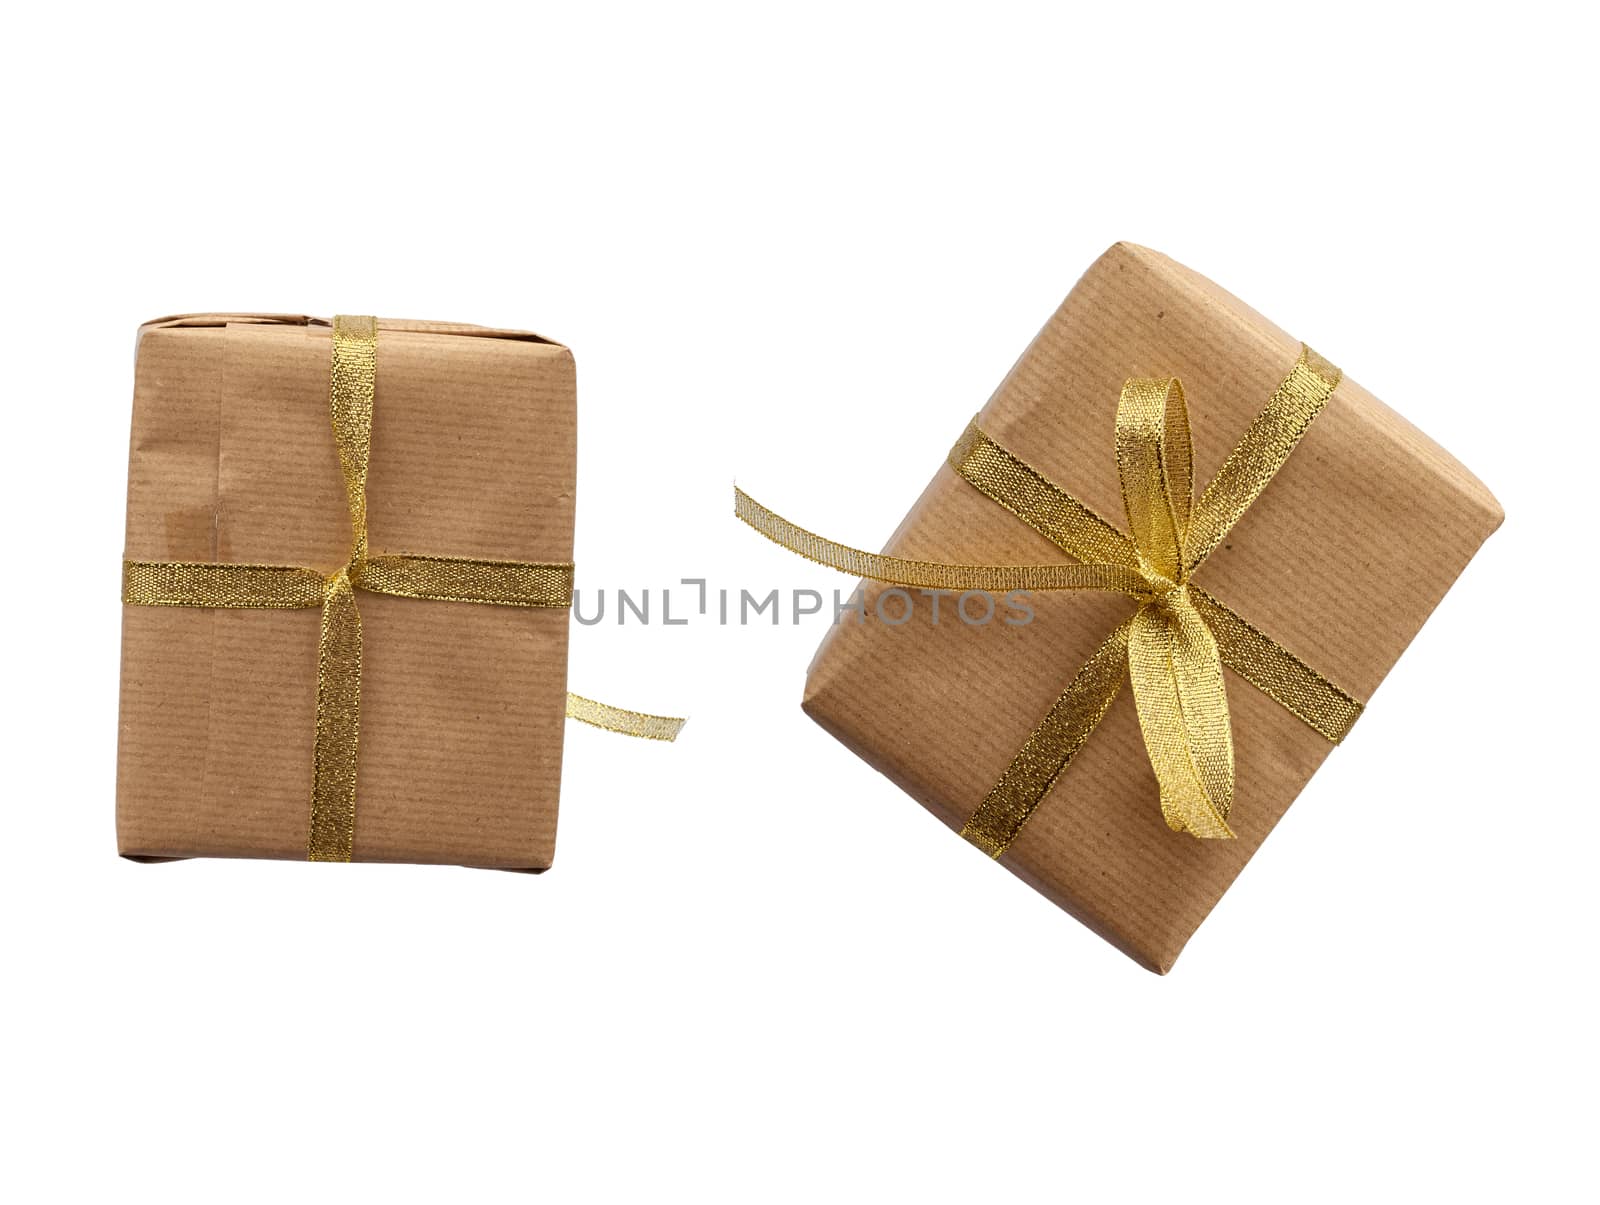 rectangular box wrapped in brown kraft paper and tied with a blue ribbon, gift isolated on a white background, element for a designer